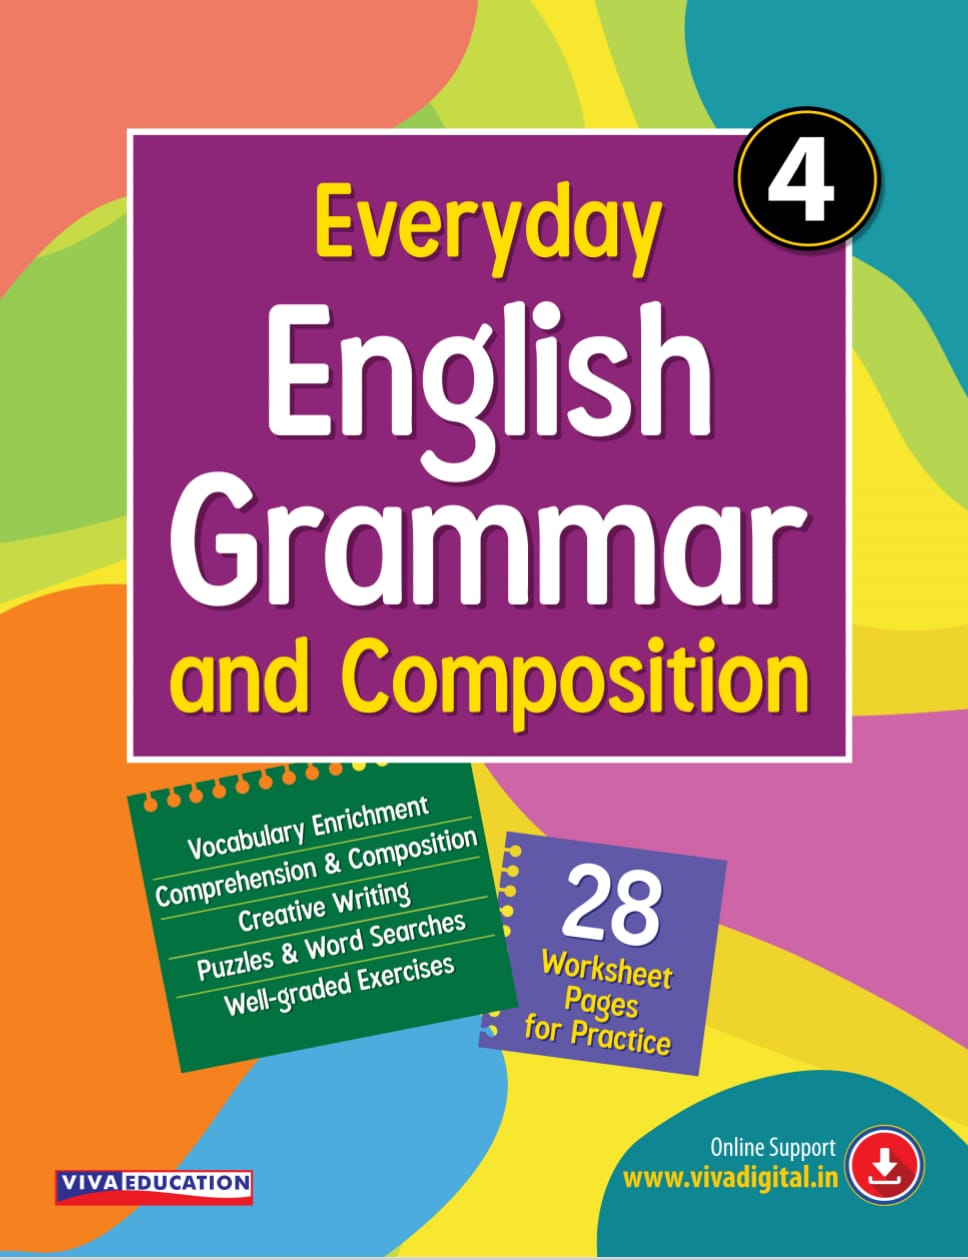 Everyday English Grammar and Composition